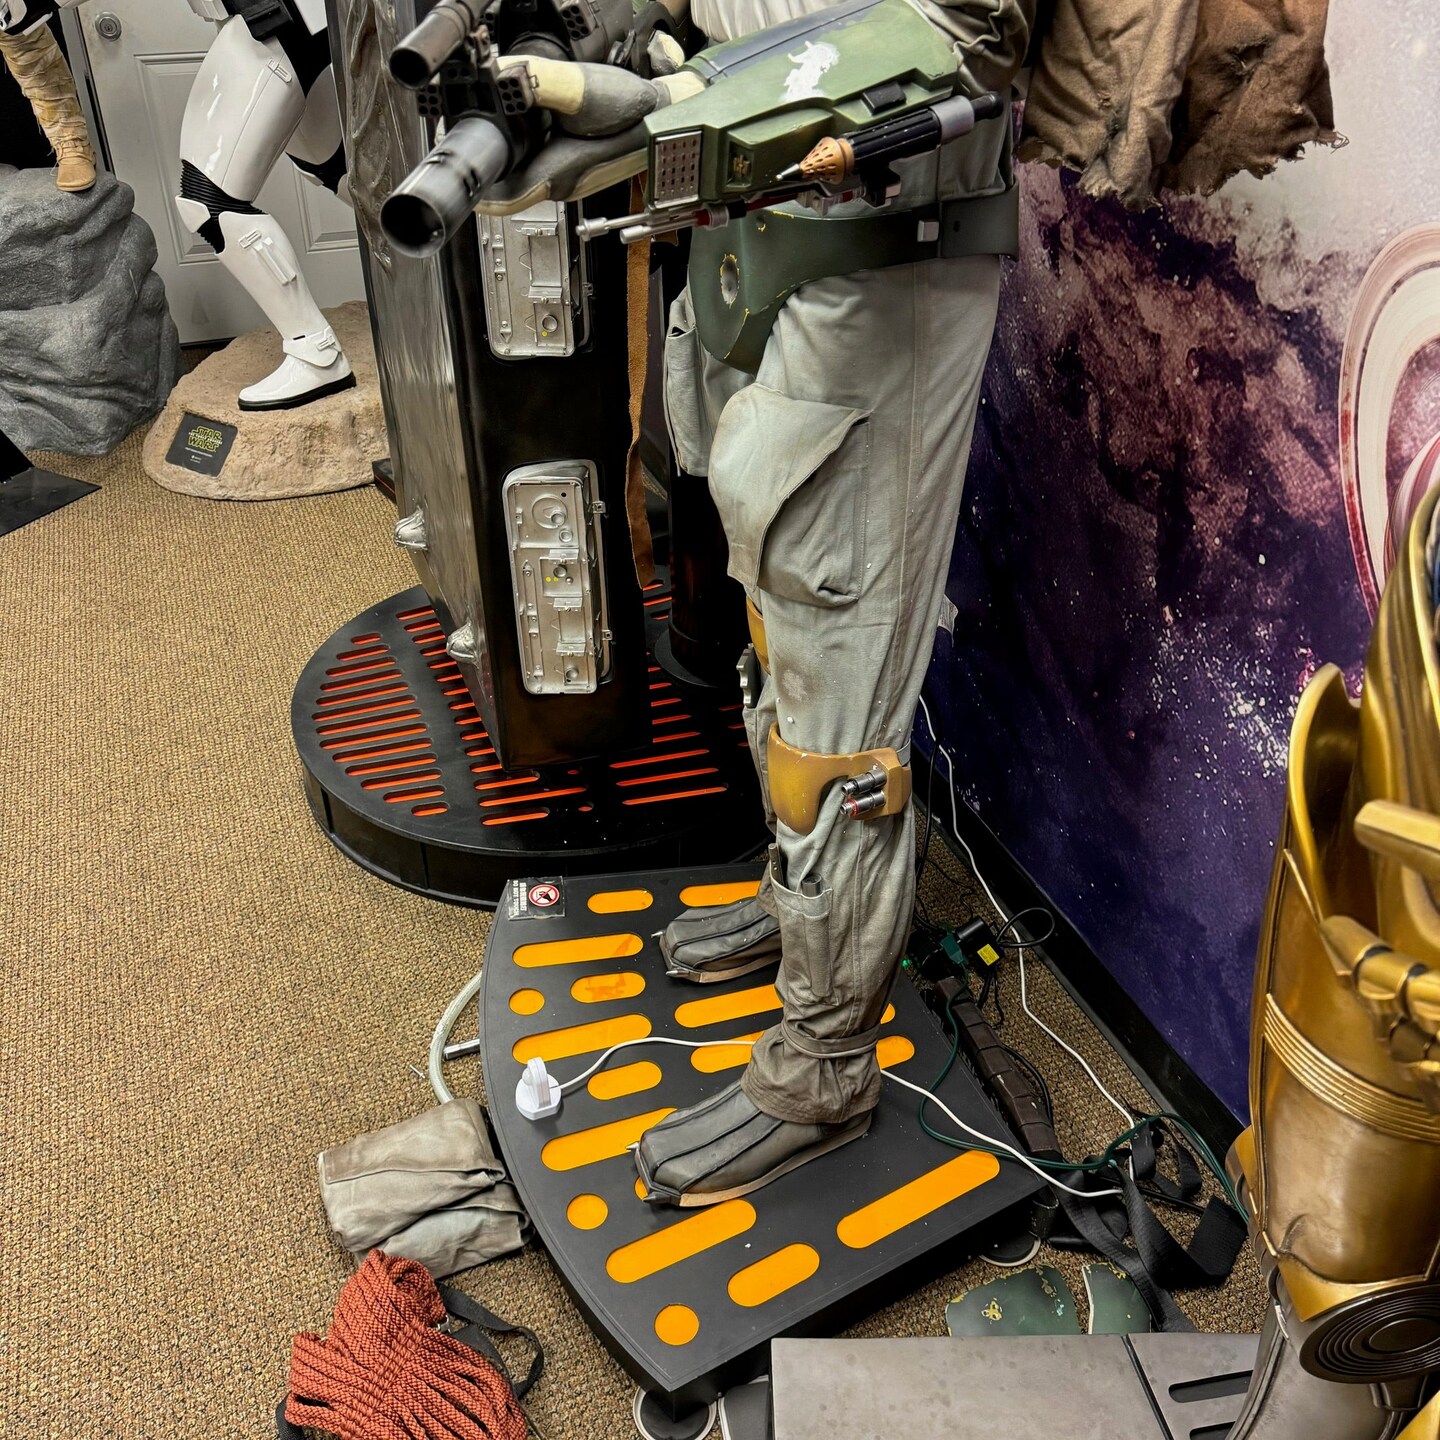 Pre-Owned Star Wars Boba Fett Life Size Statue